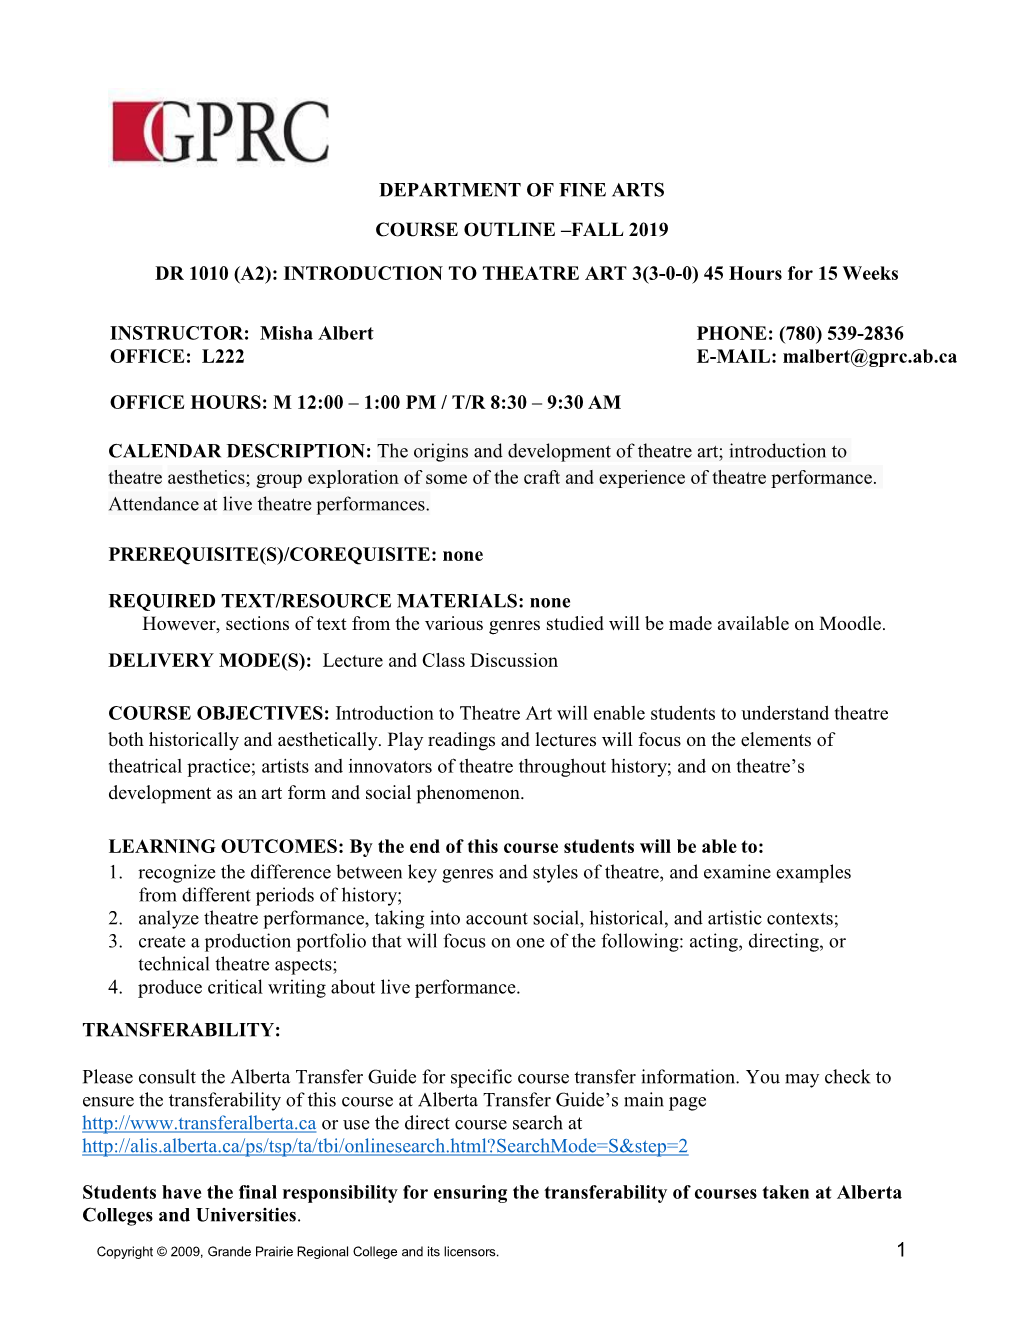 1 DEPARTMENT of FINE ARTS COURSE OUTLINE –FALL 2019 DR 1010 (A2): INTRODUCTION to THEATRE ART 3(3-0-0) 45 Hours for 15 Weeks I